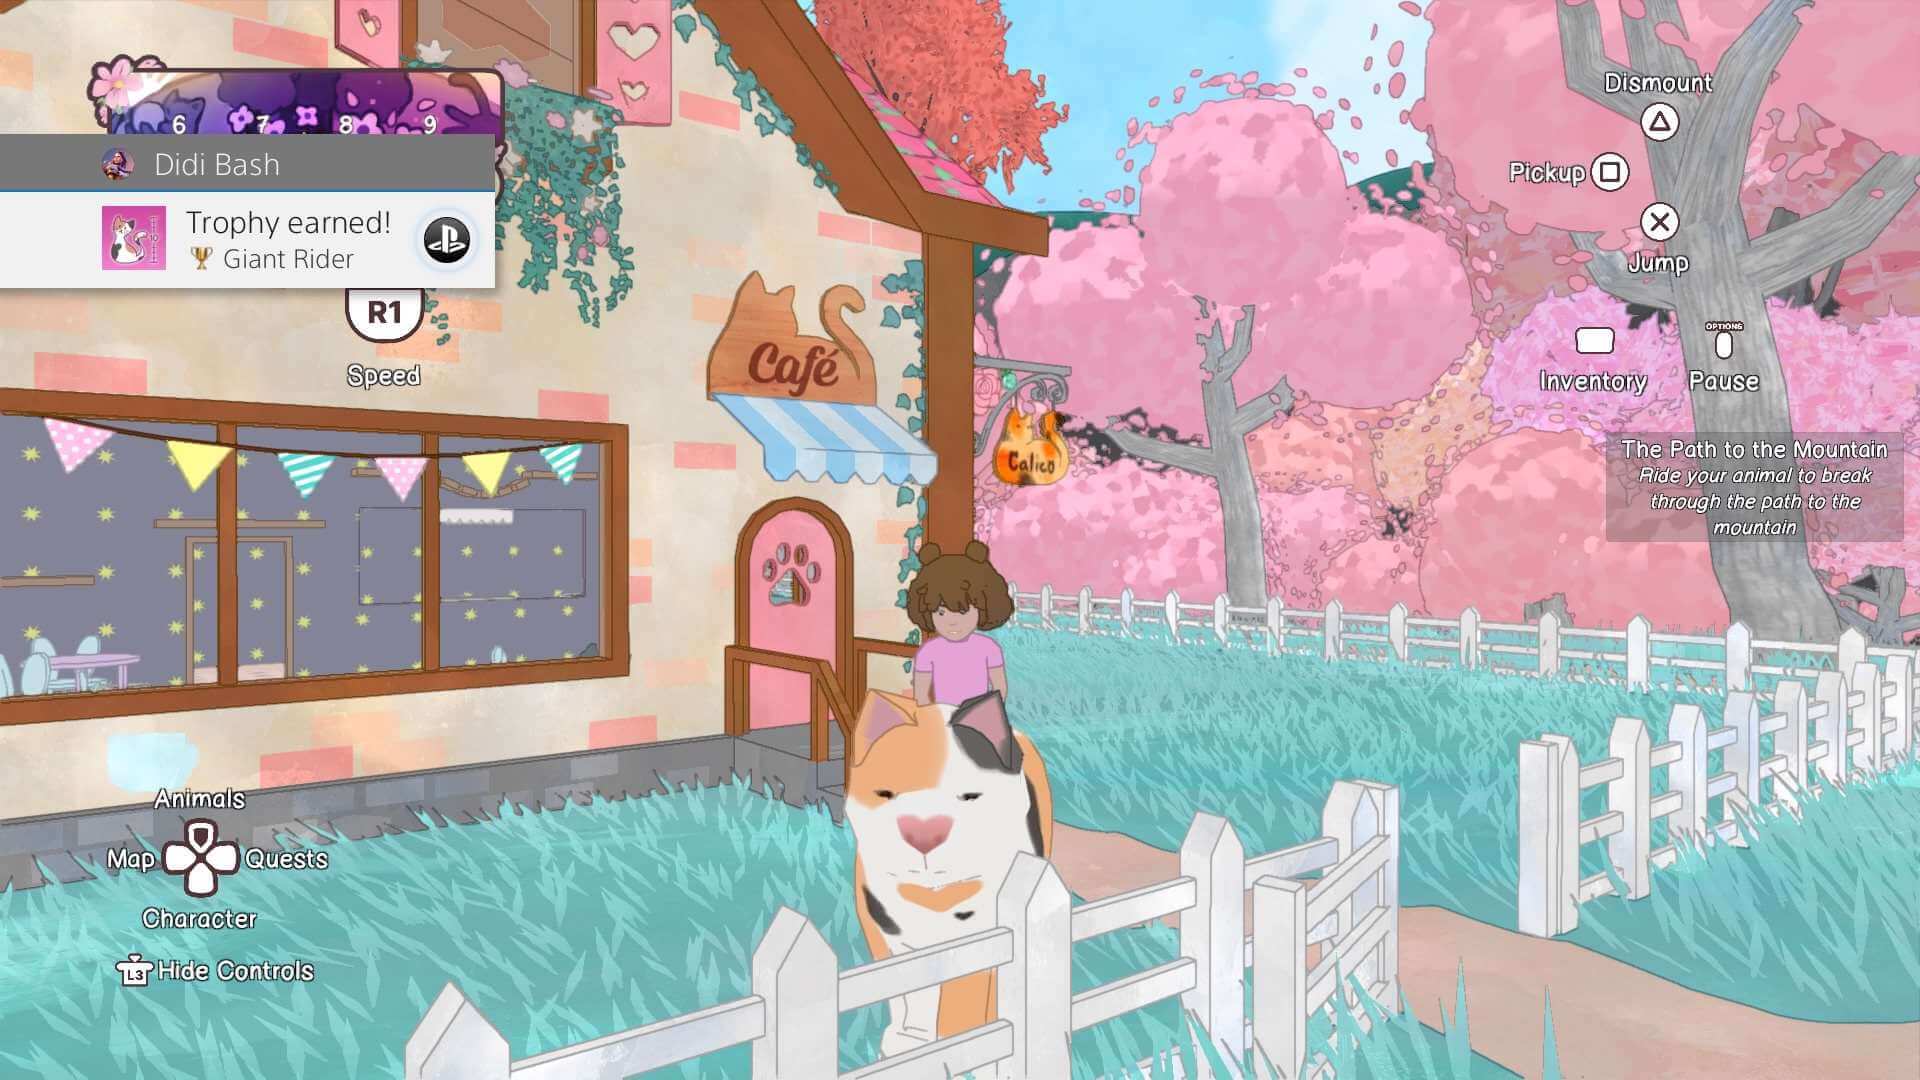 My character mounted on a large tabby cat named Pudgems. Stood in front of the cafe. You can see cherry blossom and the grassy field as well as the entrance to the cafe. 